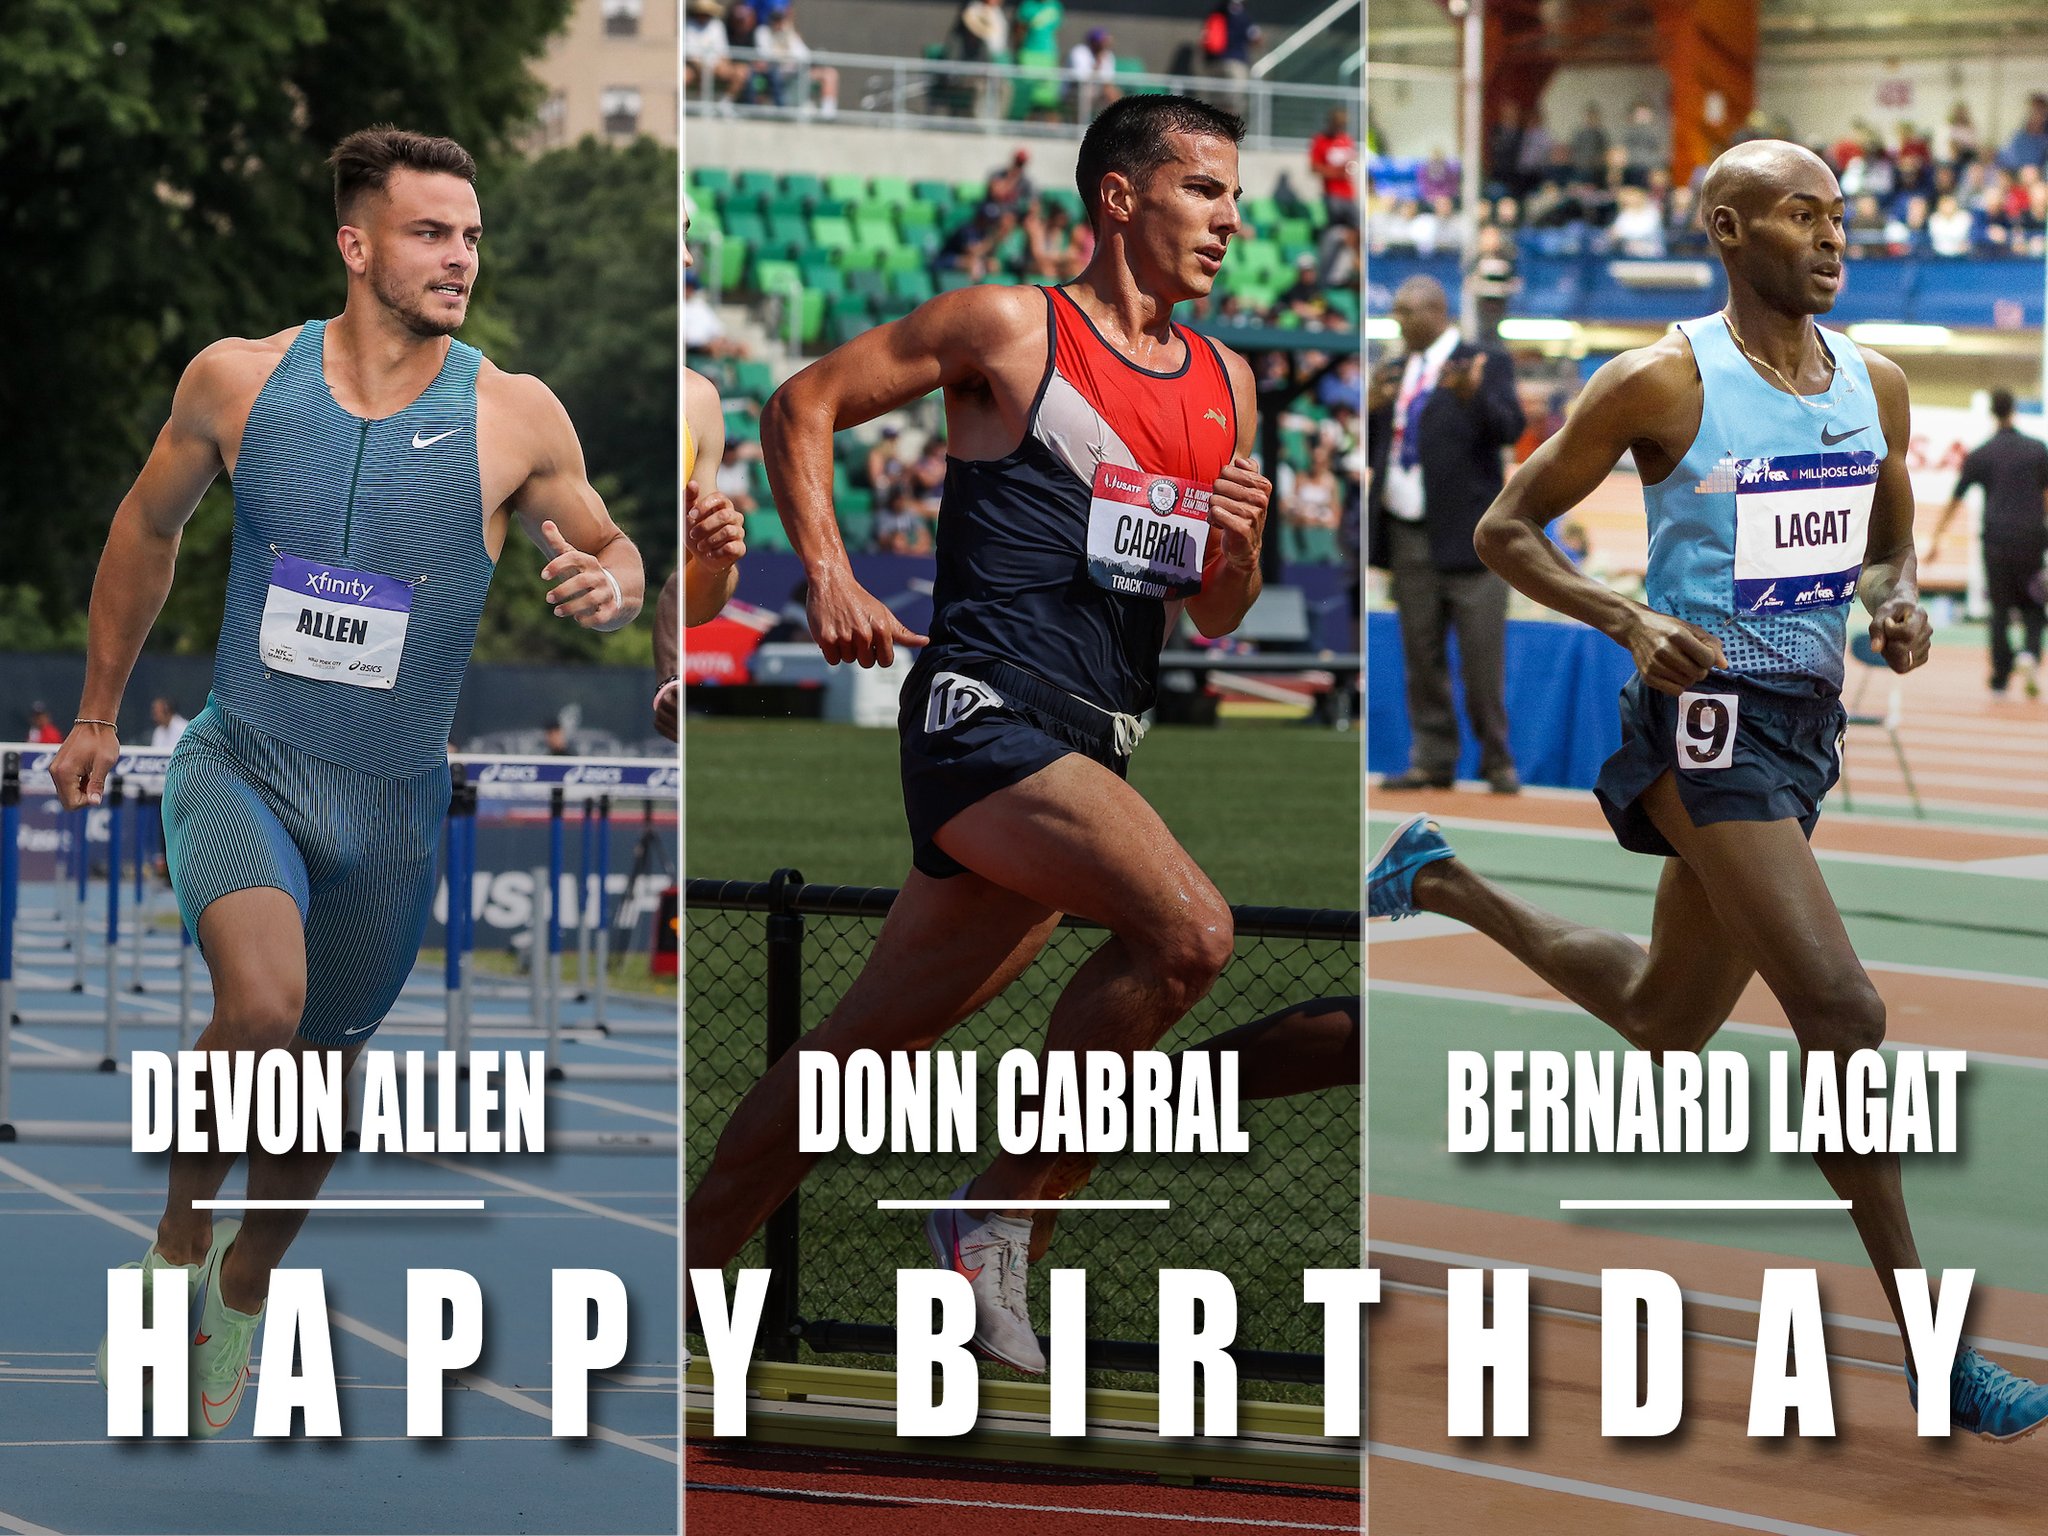 Wishing a very Happy Birthday today to Devon Allen, Donn Cabral, and Bernard Lagat! Kevin Morris 